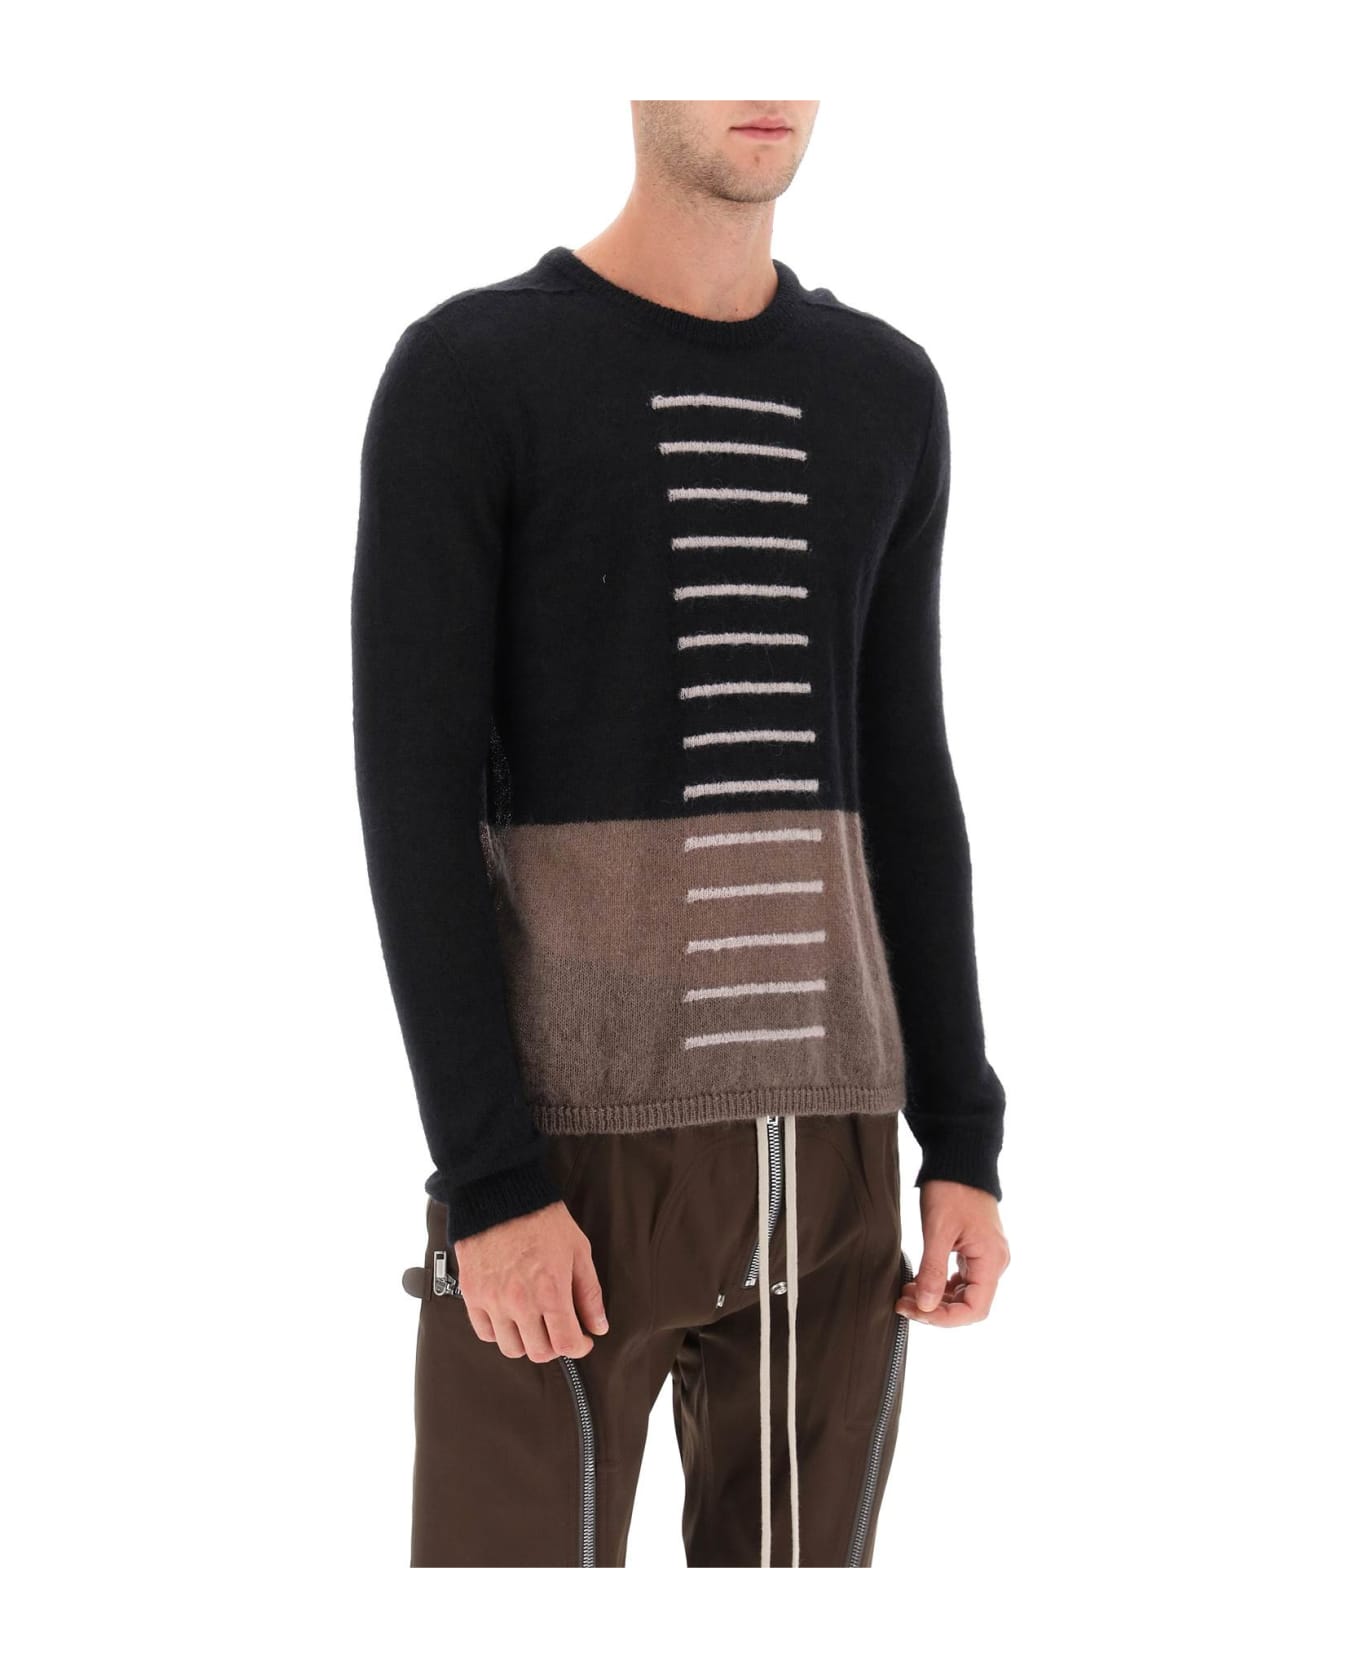 Rick Owens 'judd' Sweater With Contrasting Lines - BLACK DUST PEARL (Black)